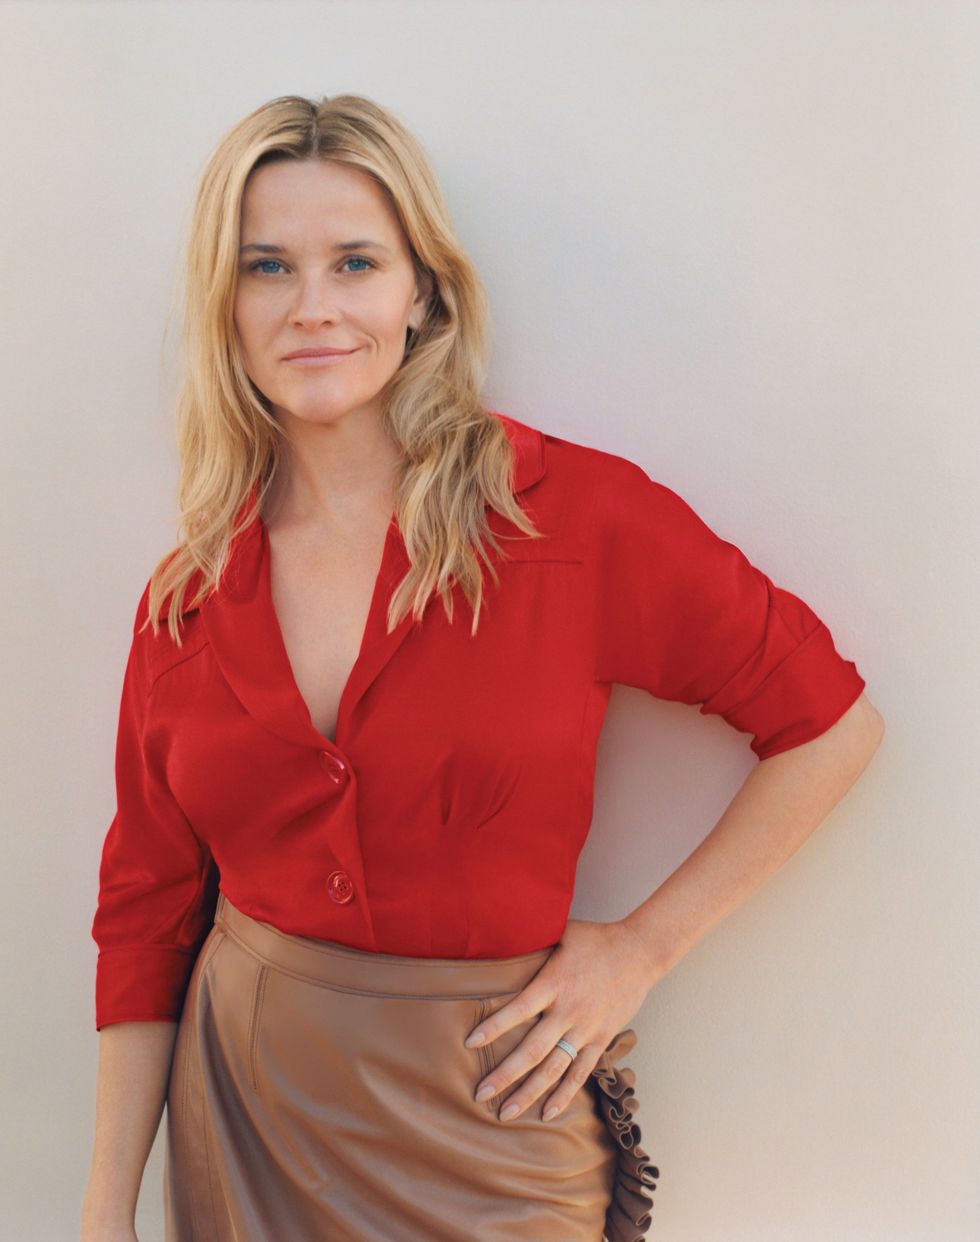 Reese Witherspoon 30